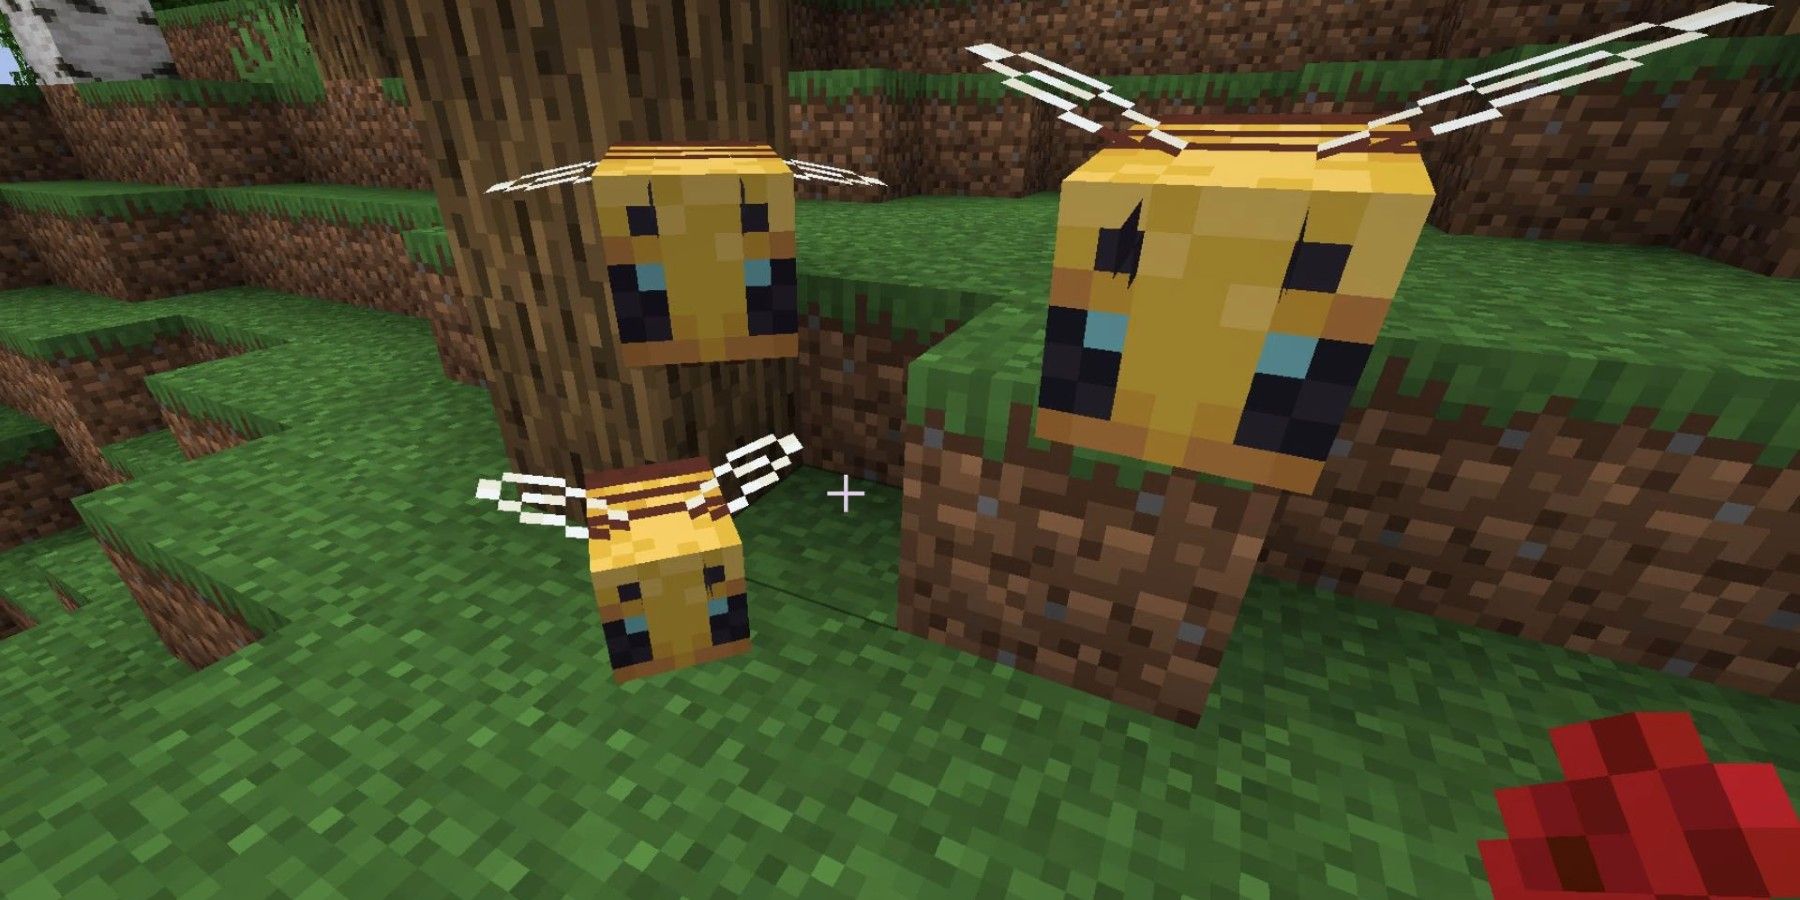 A Minecraft Fan Creates a 3D-Printed Bee Inspired by the Game